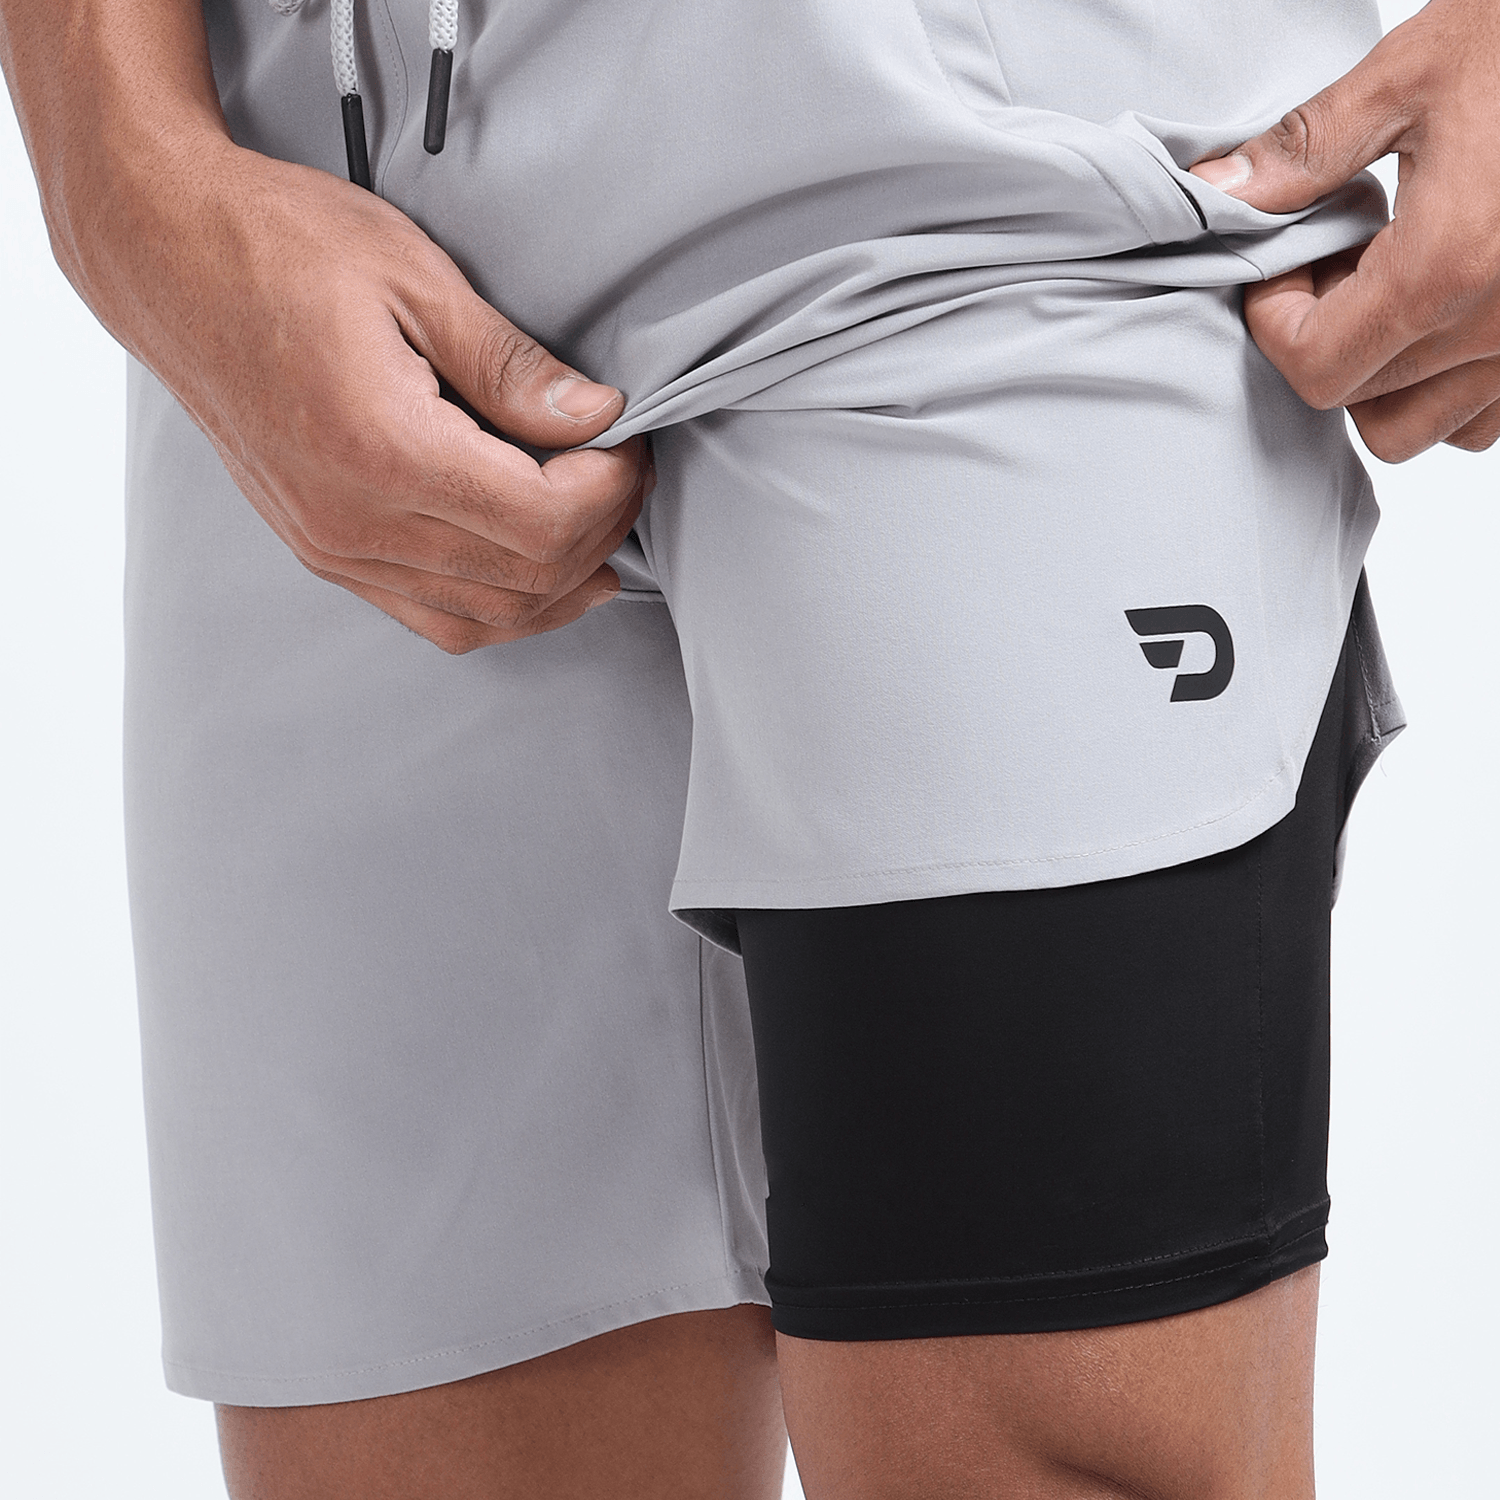 Denmonk's fashionable 2-IN-1 SHORTS light grey shorts for men will boost your level of gym fitness.